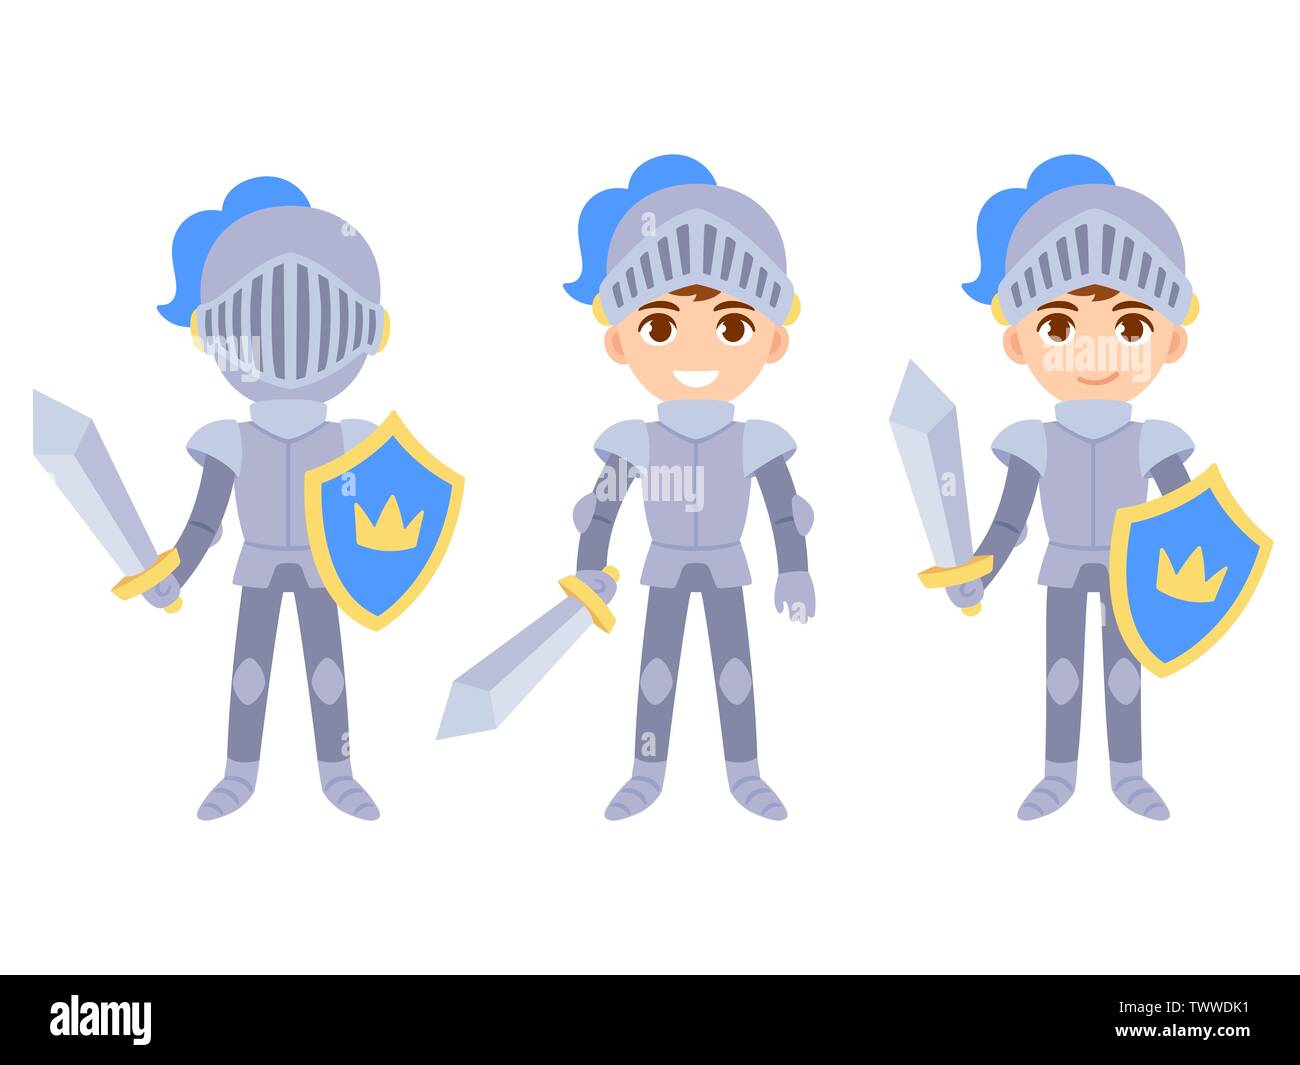 Cute cartoon boy in medieval knight costume. Kid in body armor with sword and shield. Isolated vector clip art illustration set. Stock Vector